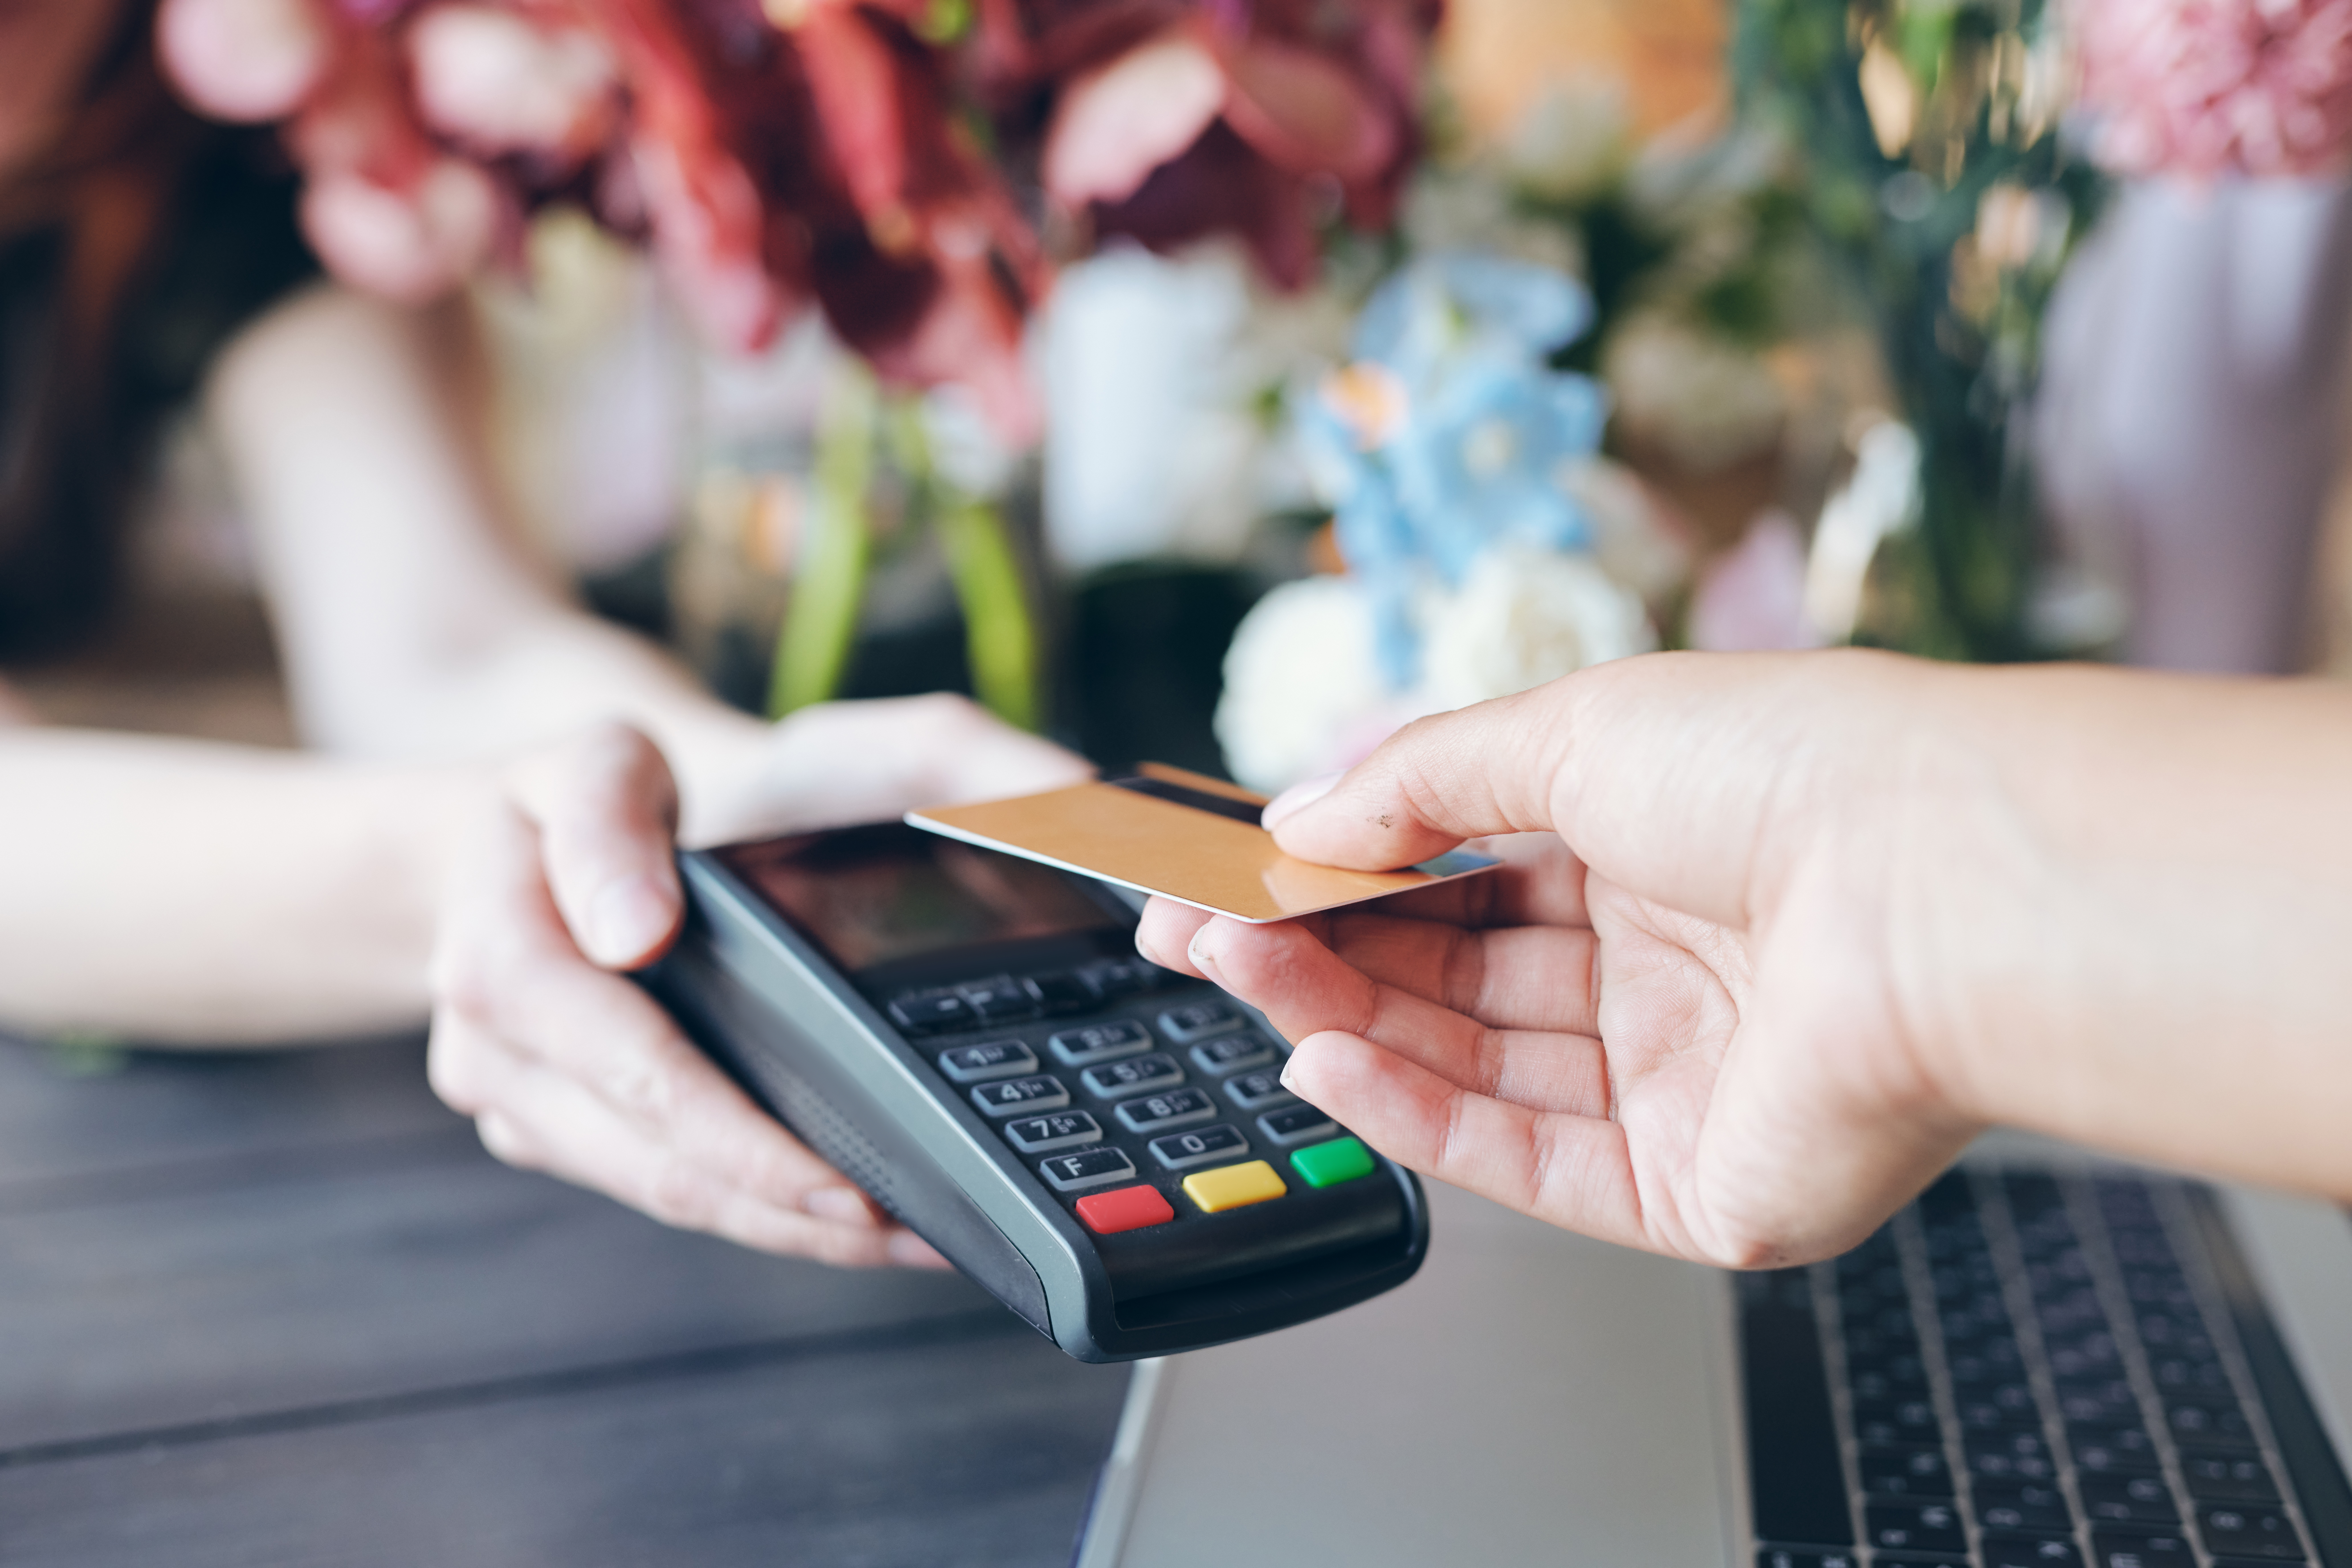 Using contactless payment in flower store